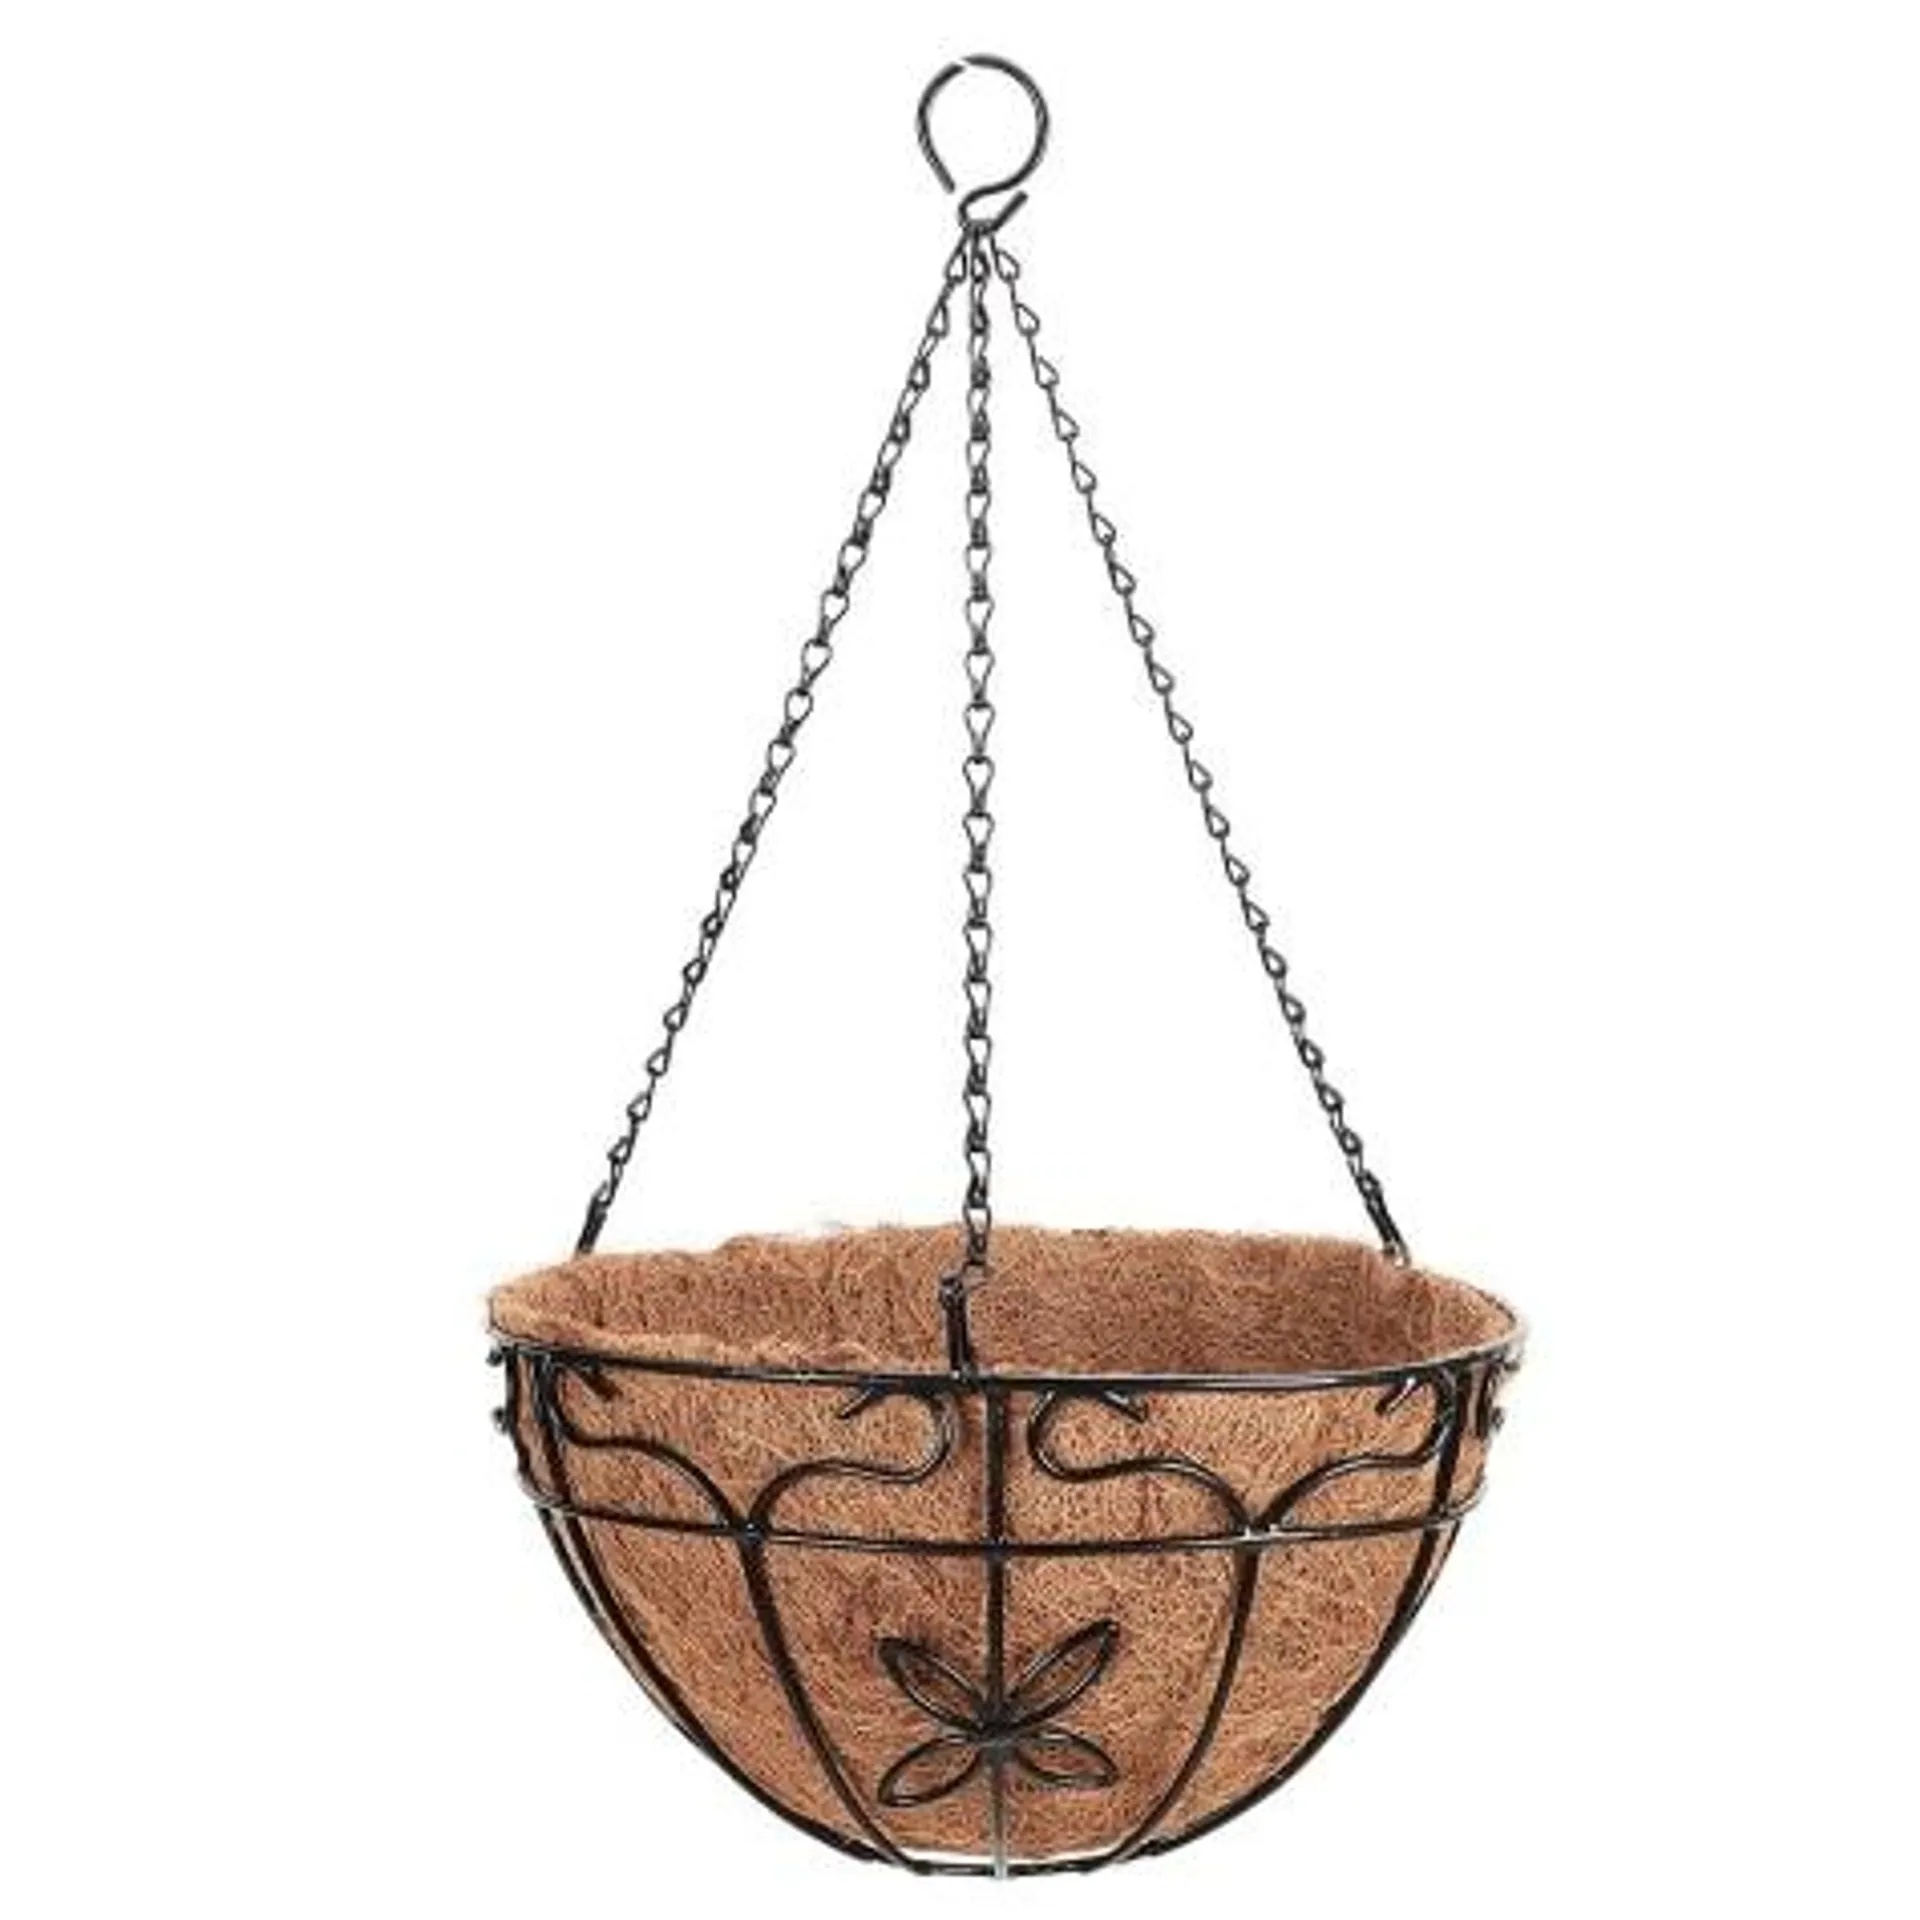 Decorative Flower Hanging Wire Basket Planter with Coco Liner, 12"